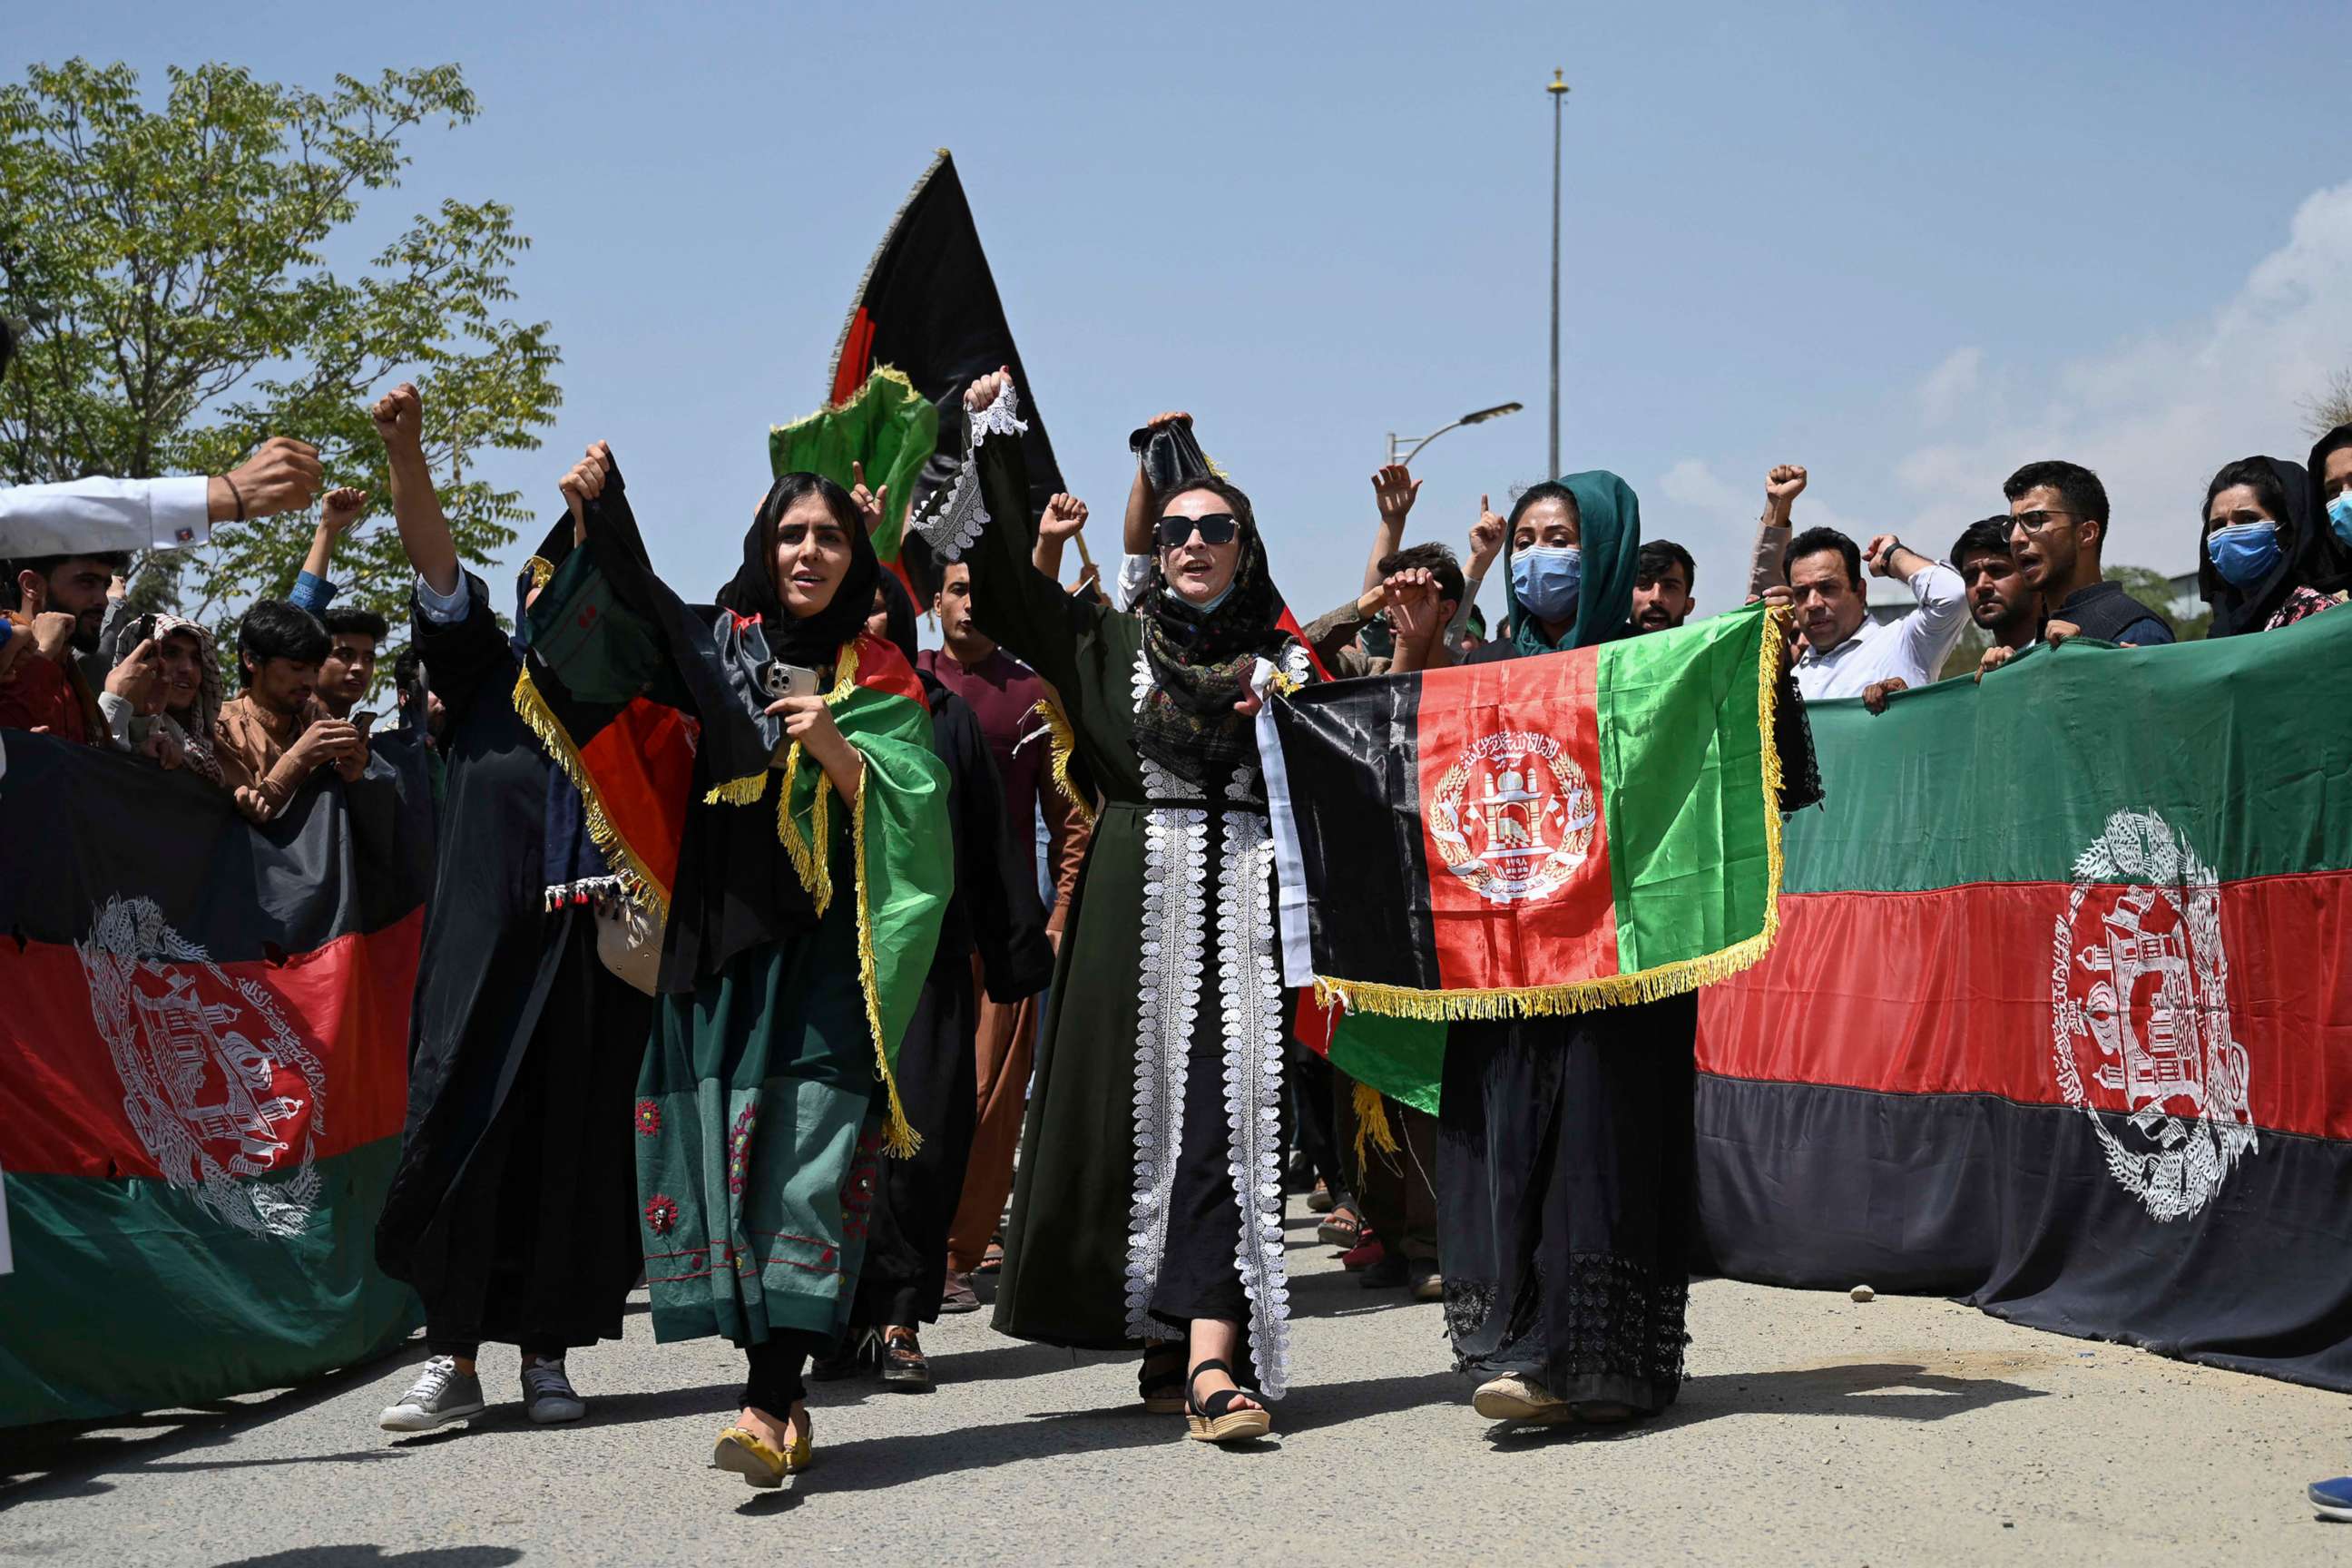 PHOTO: Afghans celebrate Independence Day with the national flag in streets of Kabul, Afghanistan, Aug. 19, 2021.